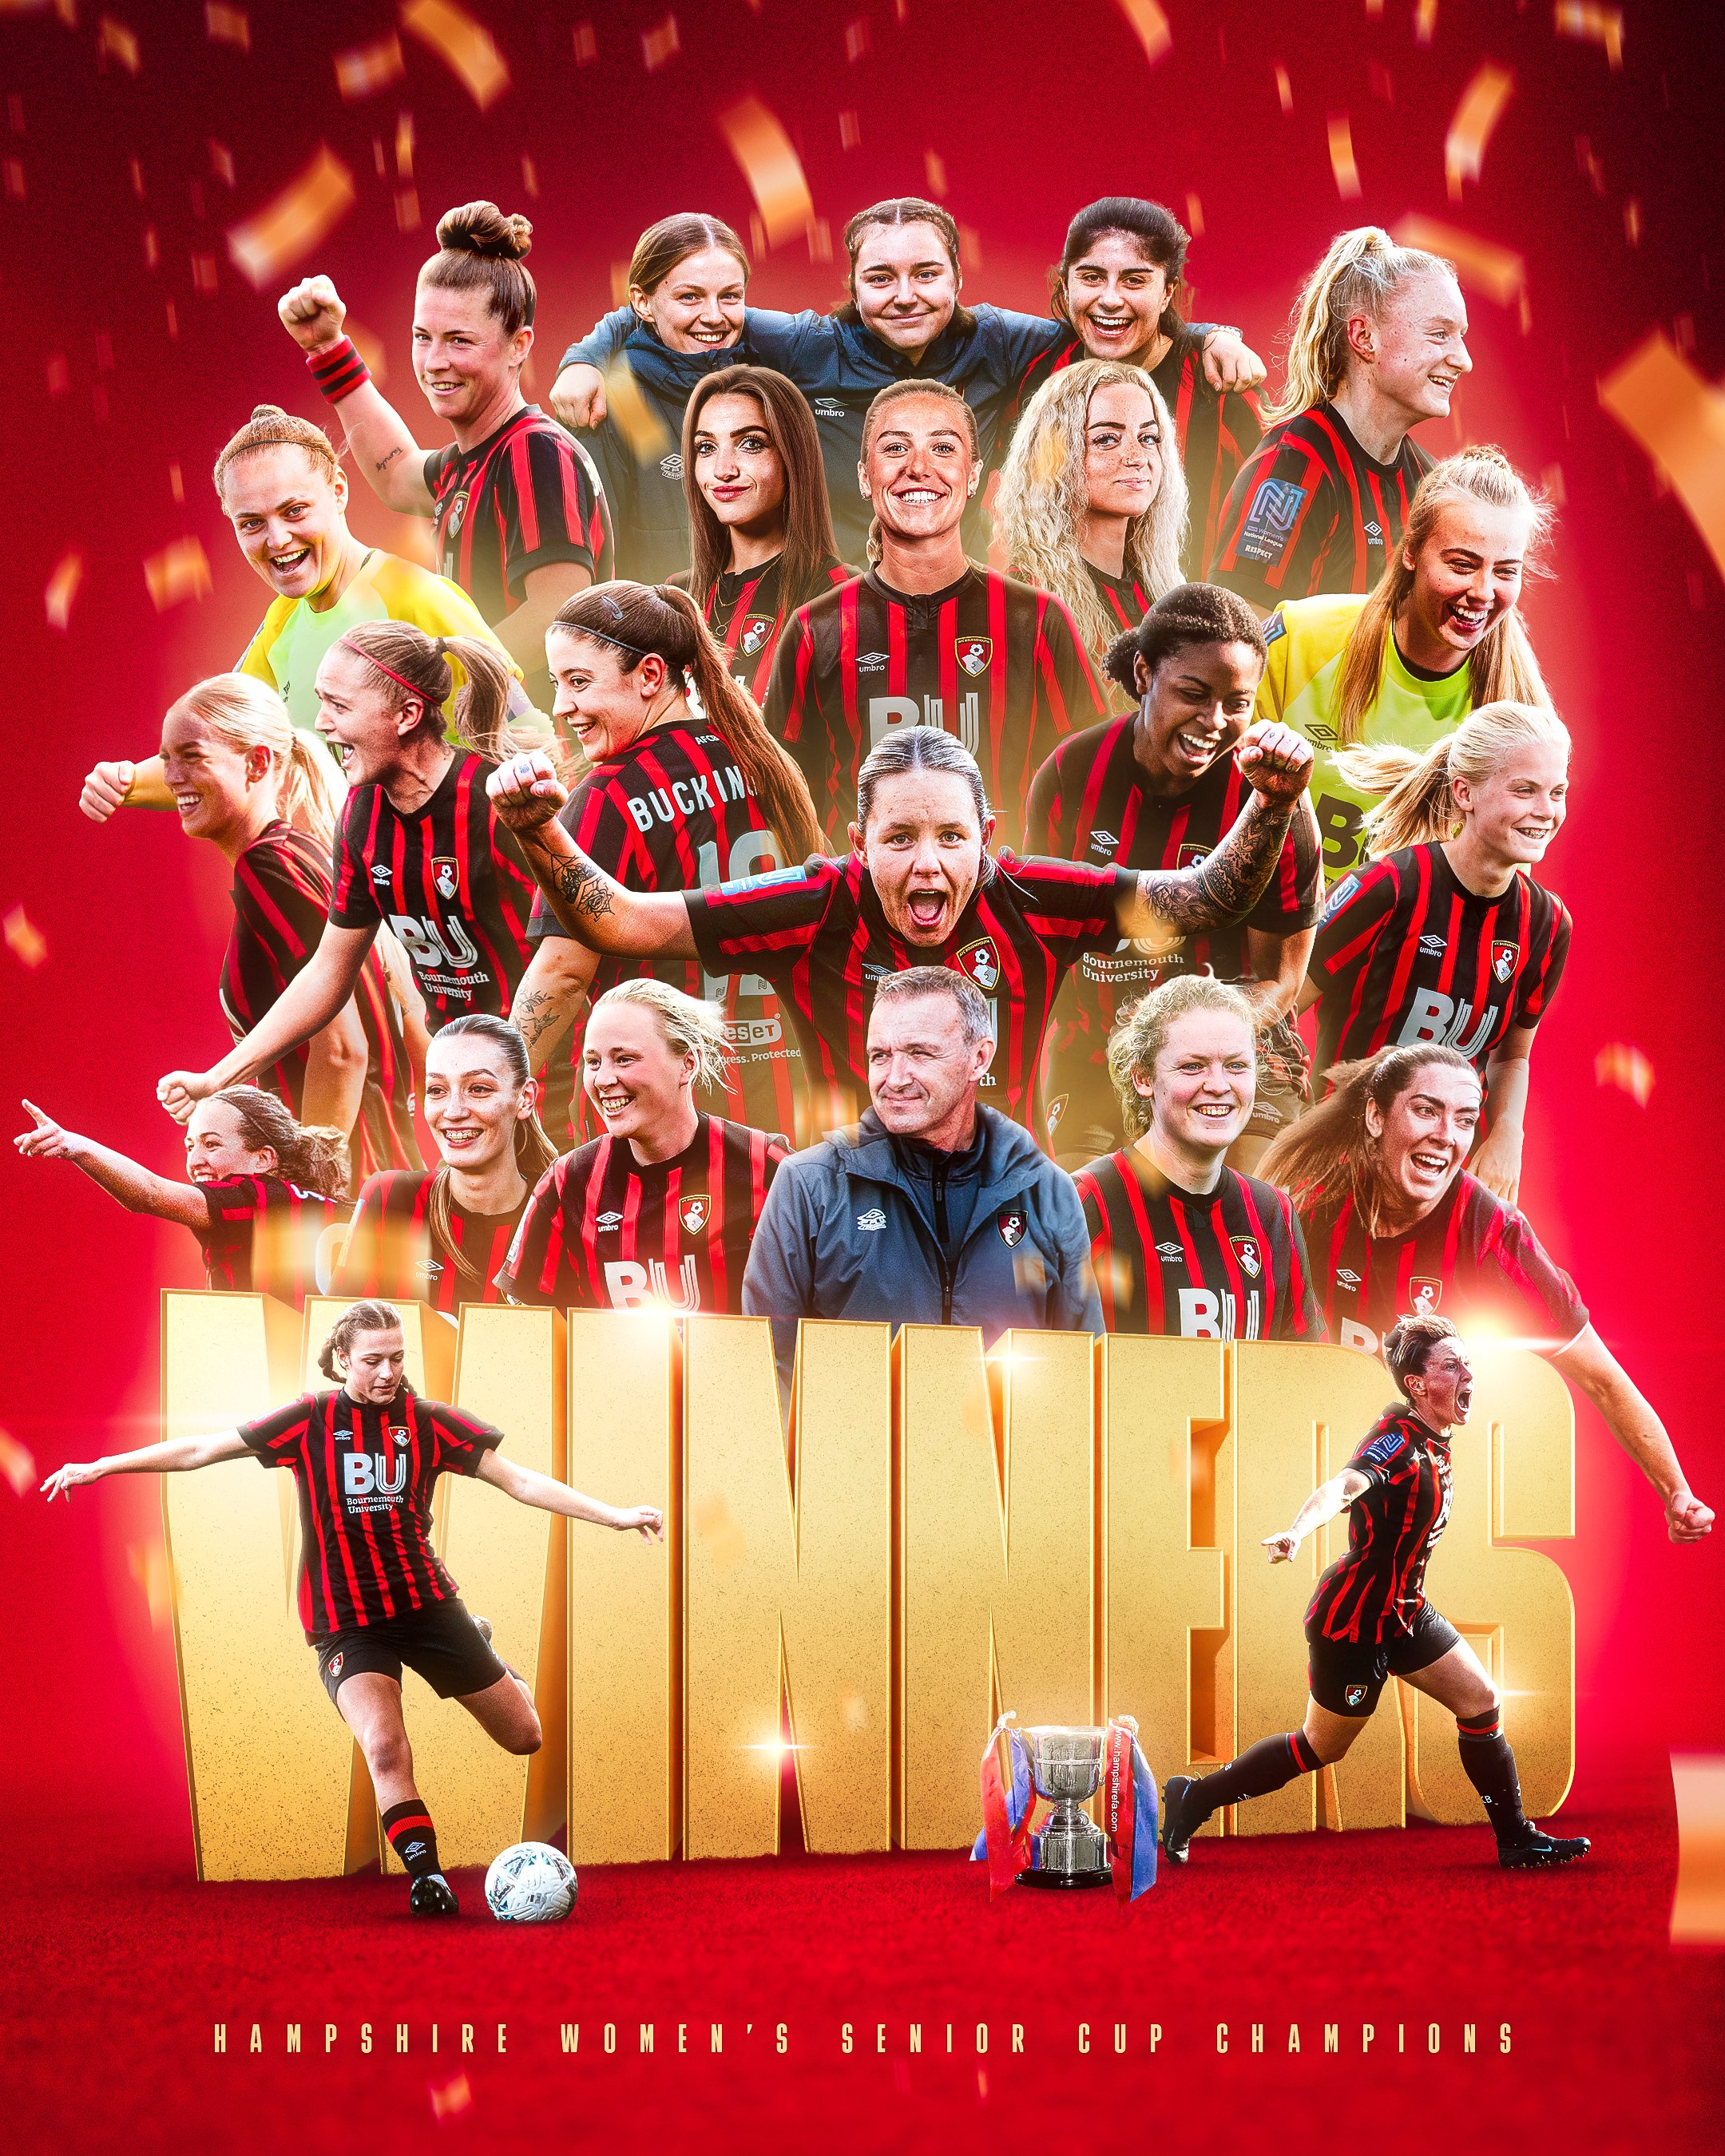 Thompson Scores in AFC Bournemouth Women's Cup Final Win (Soccer)